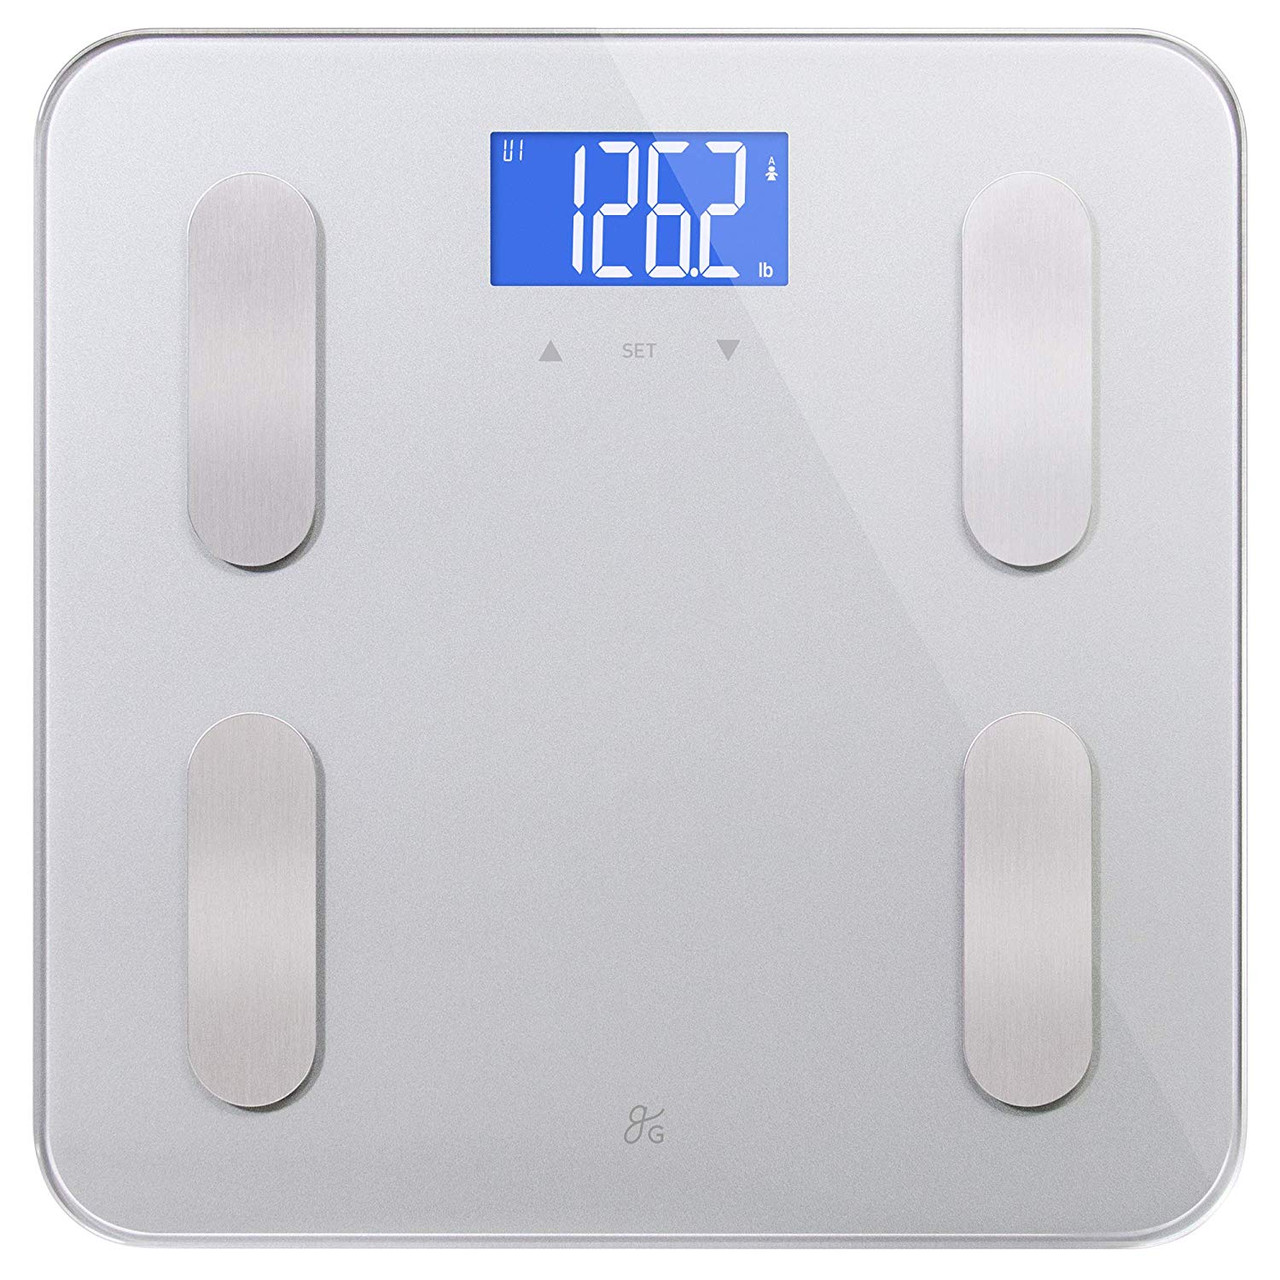 Body Composition Scale with Body Water, Body Fat and Muscle Mass